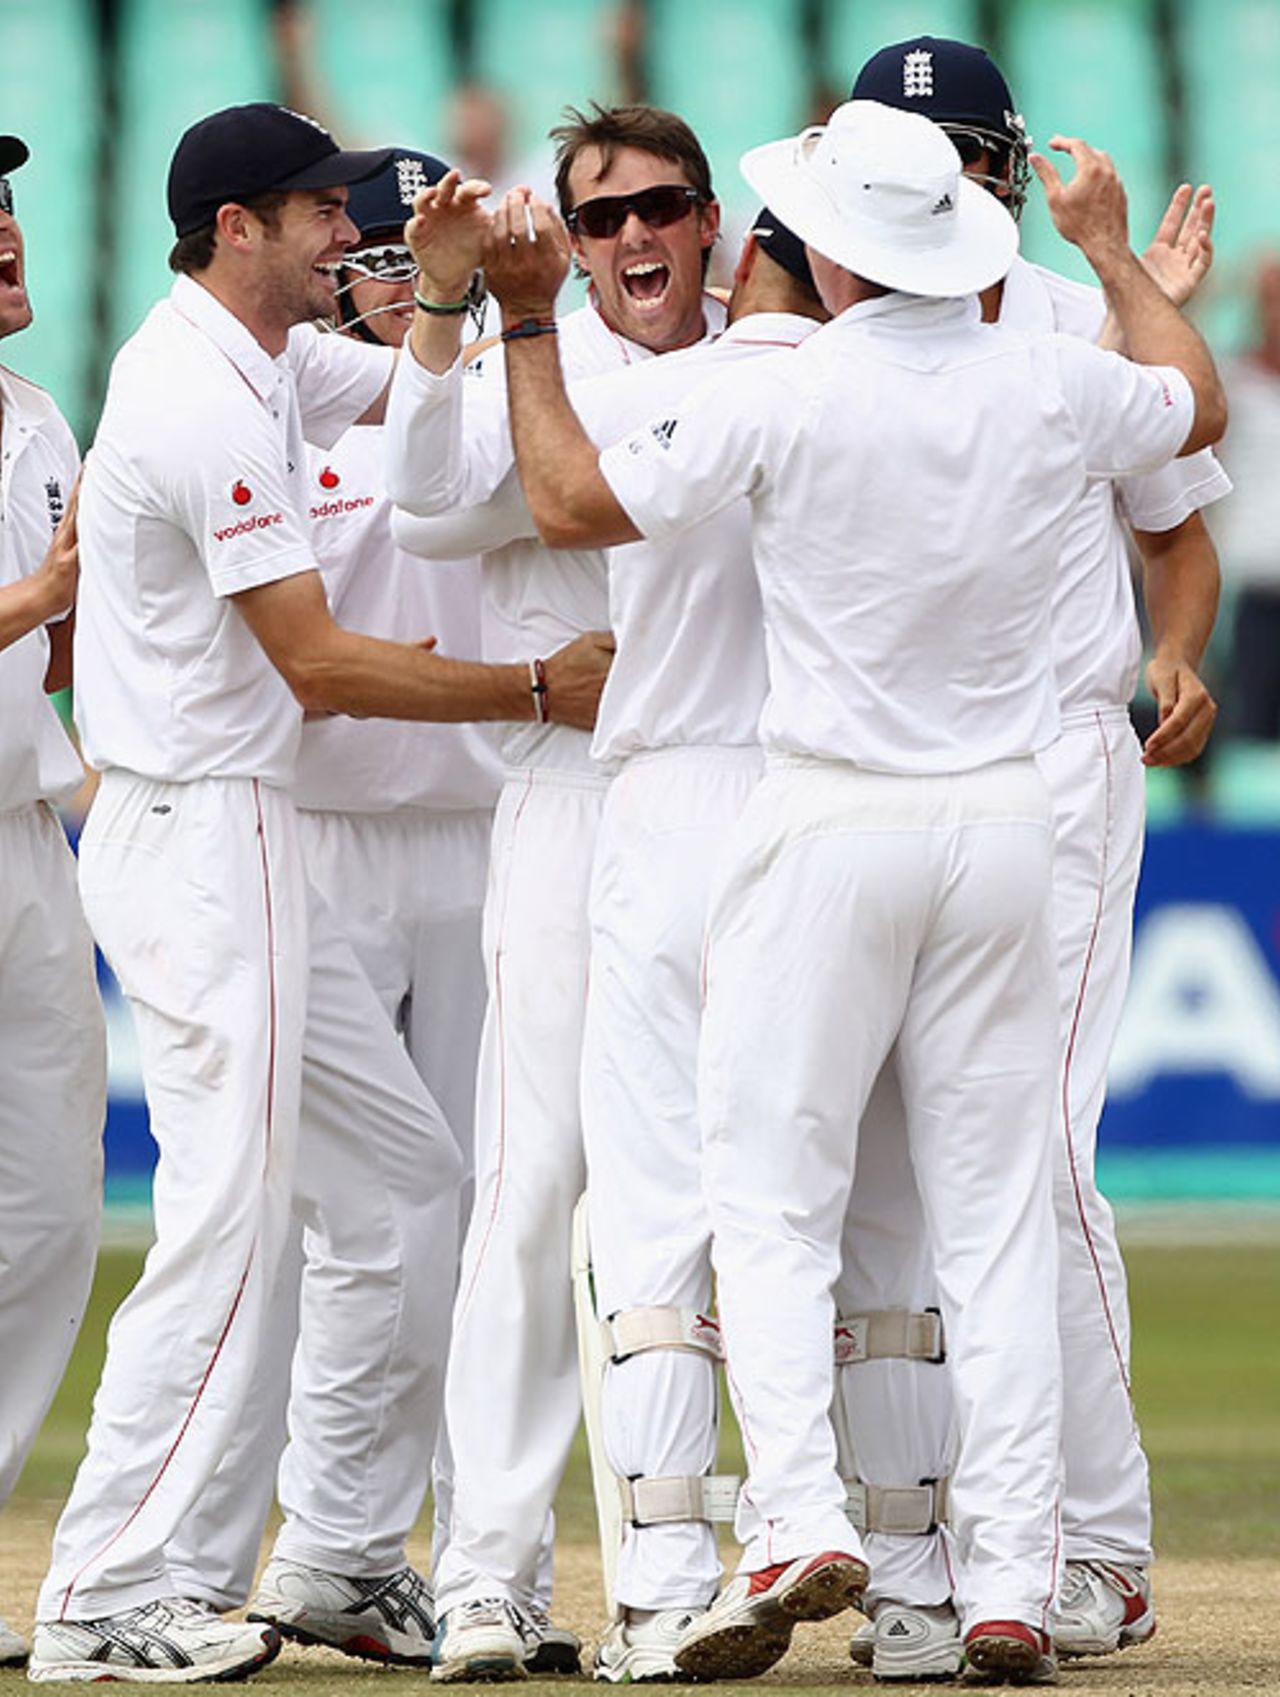 Graeme Swann completed his second five-wicket haul of the series to wrap up an innings victory, South Africa v England, 2nd Test, Durban, December 30, 2009 